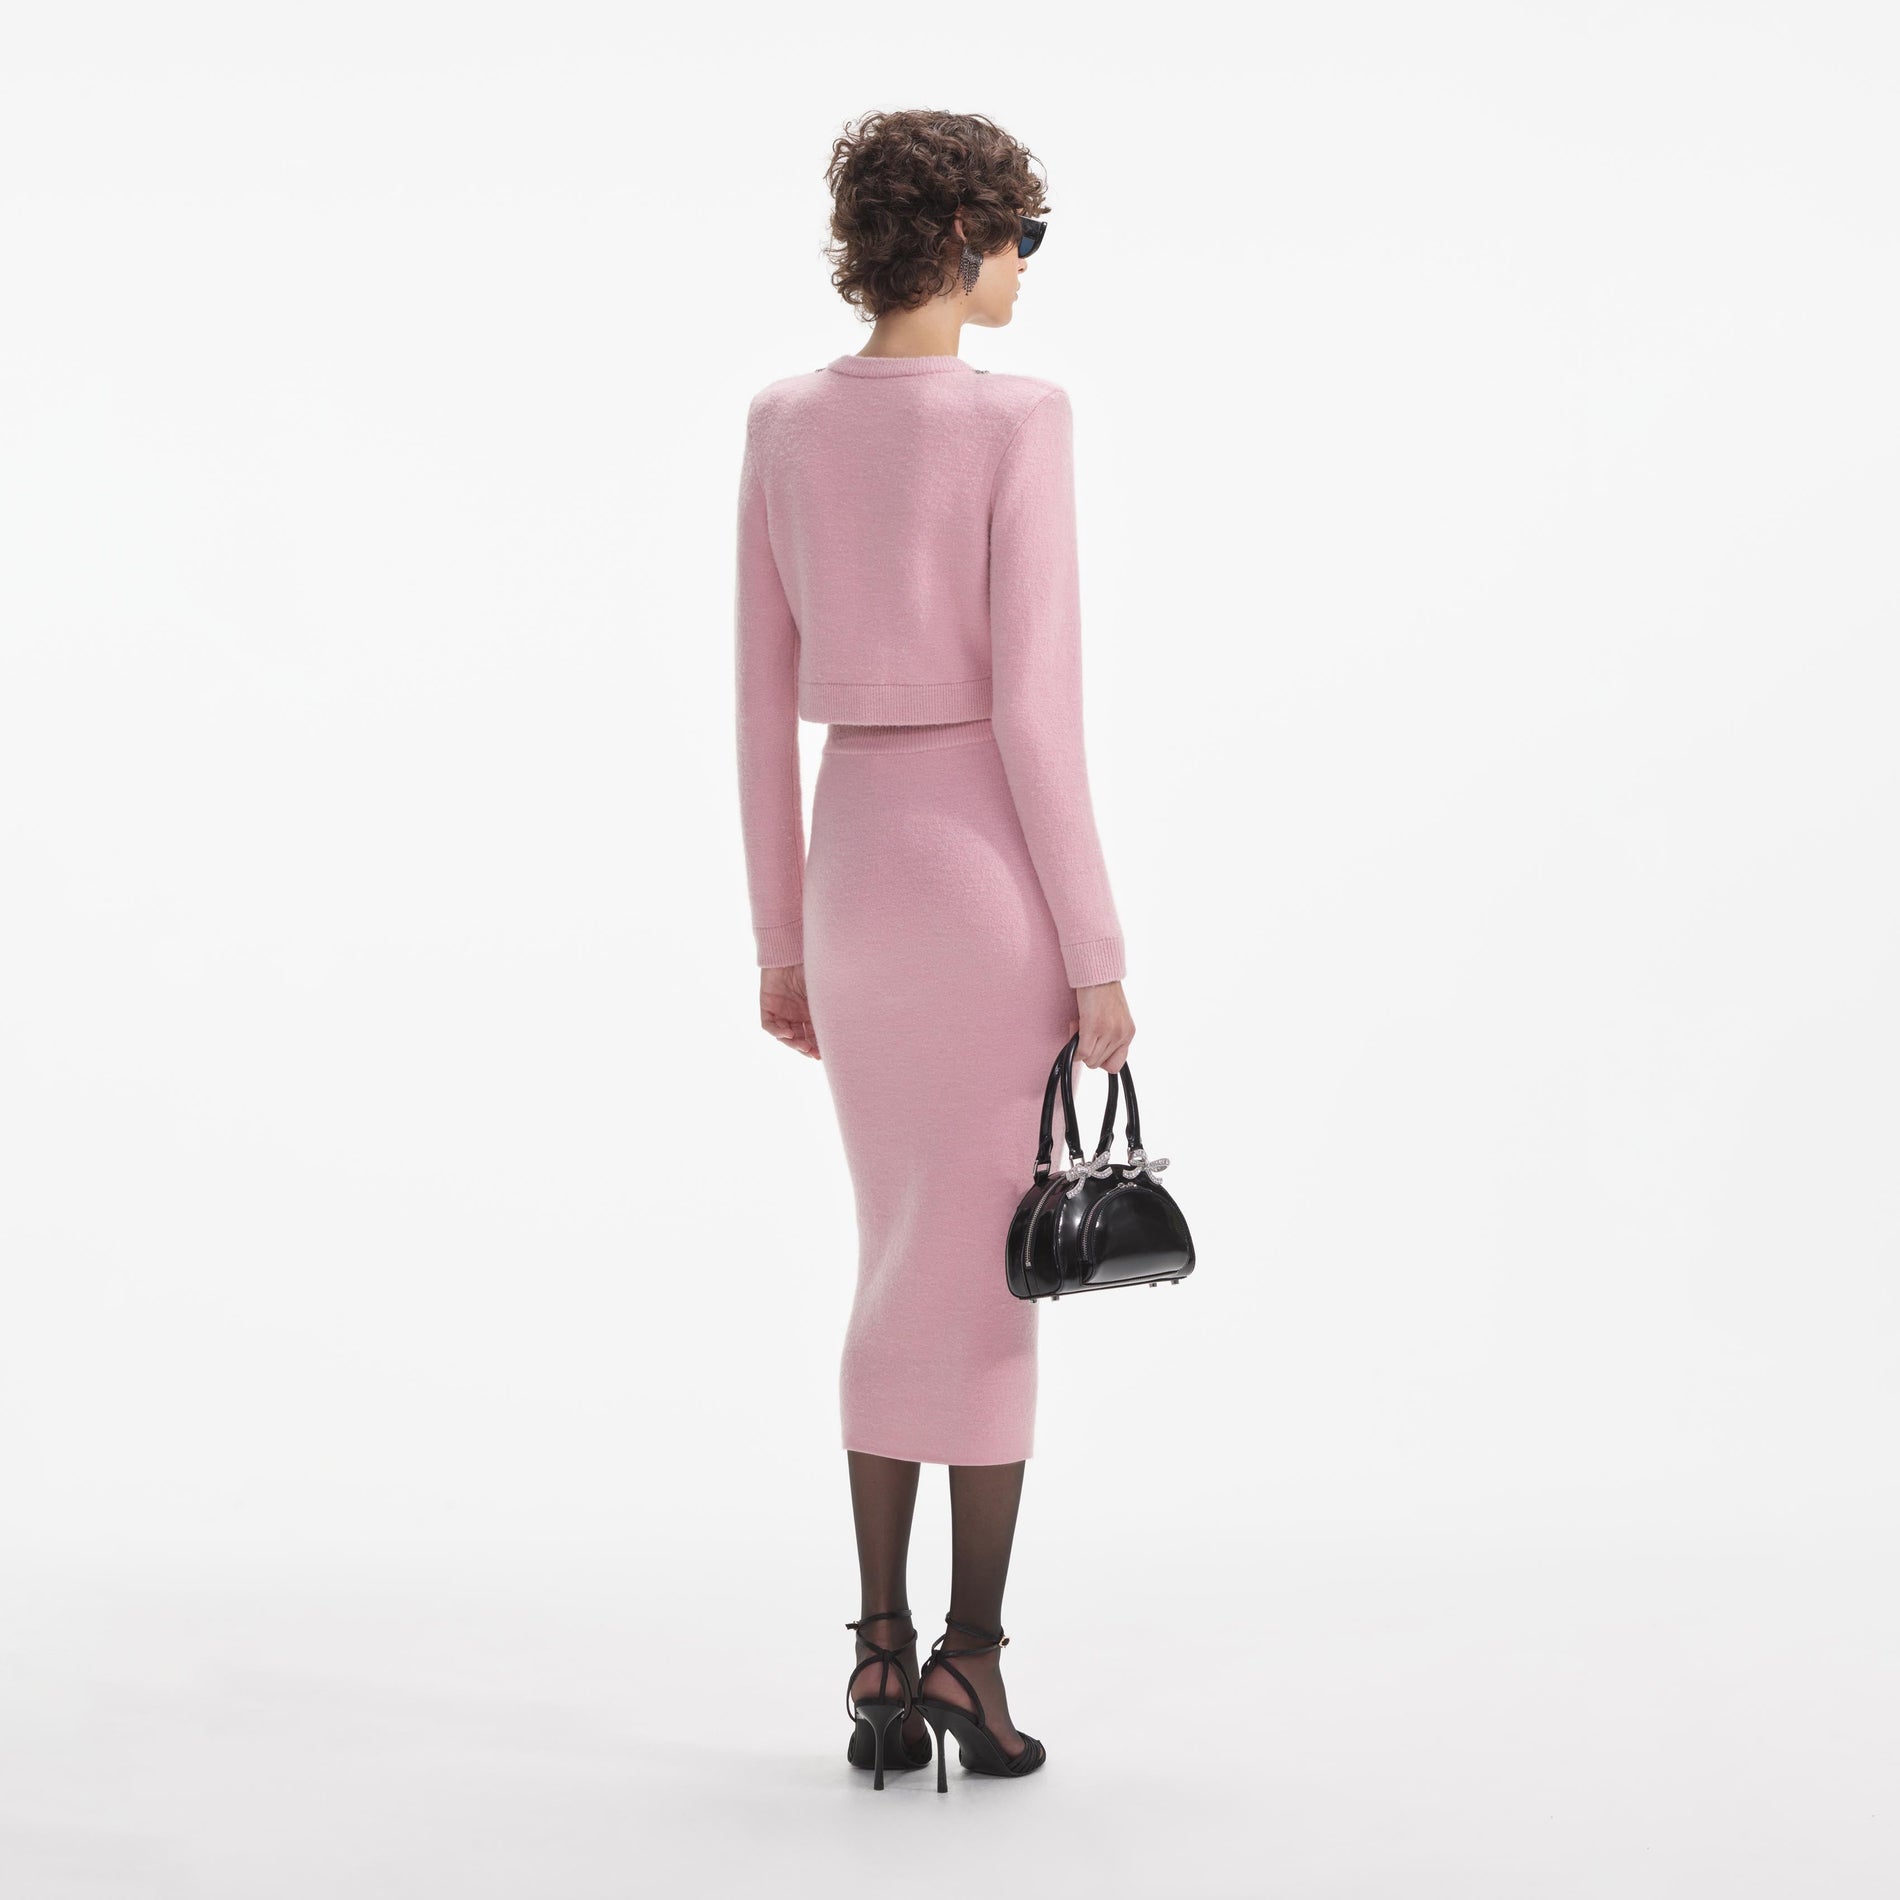 Back view of a woman wearing the White Pink Embellished Knit Midi Skirt